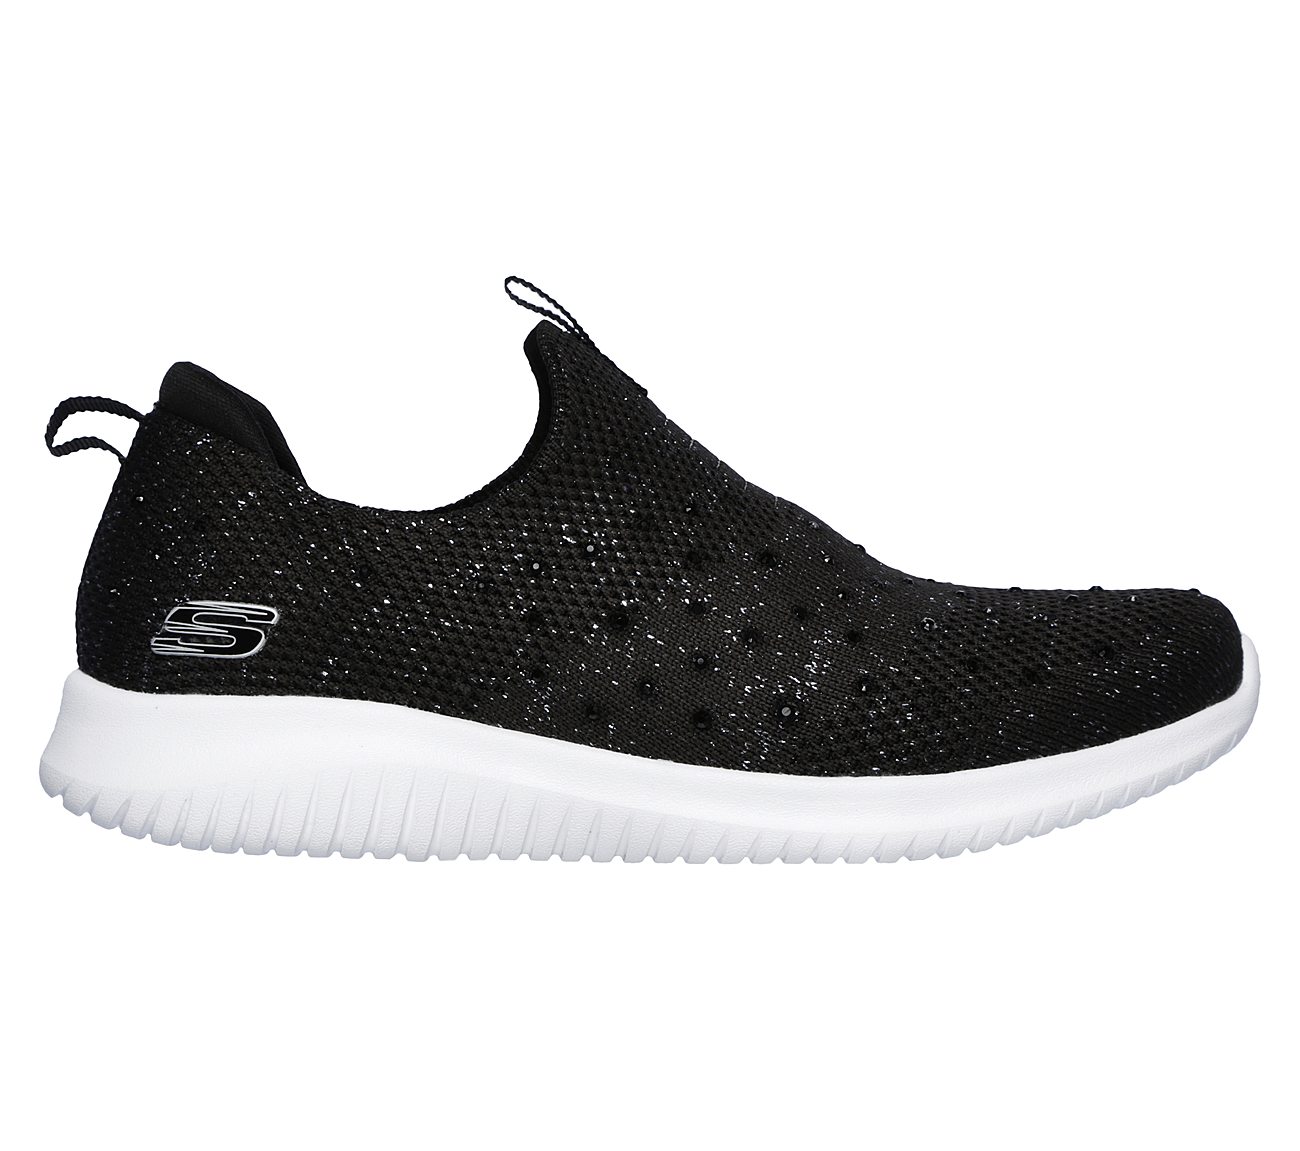 ULTRA FLEX - THRIVE UP, BLACK/SILVER Footwear Right View